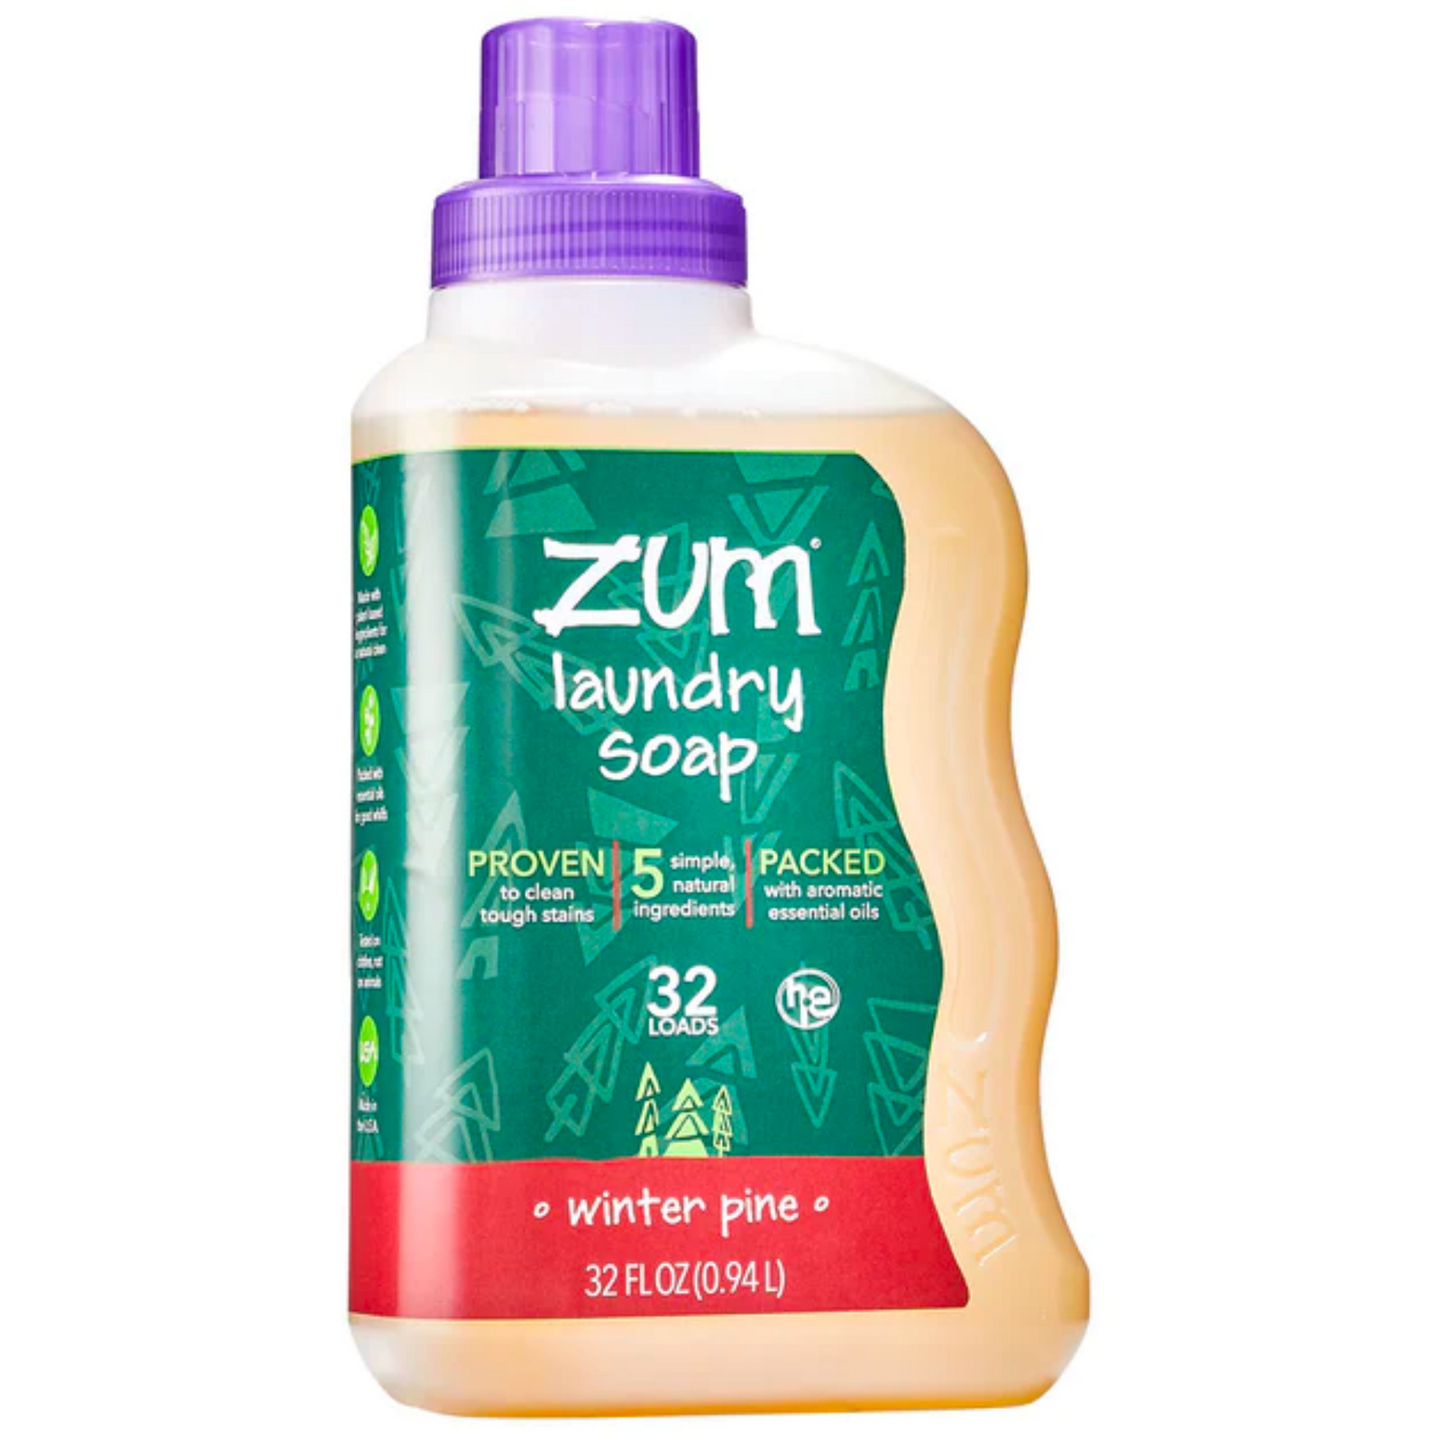 Primary Image of Winter Pine Laundry Soap